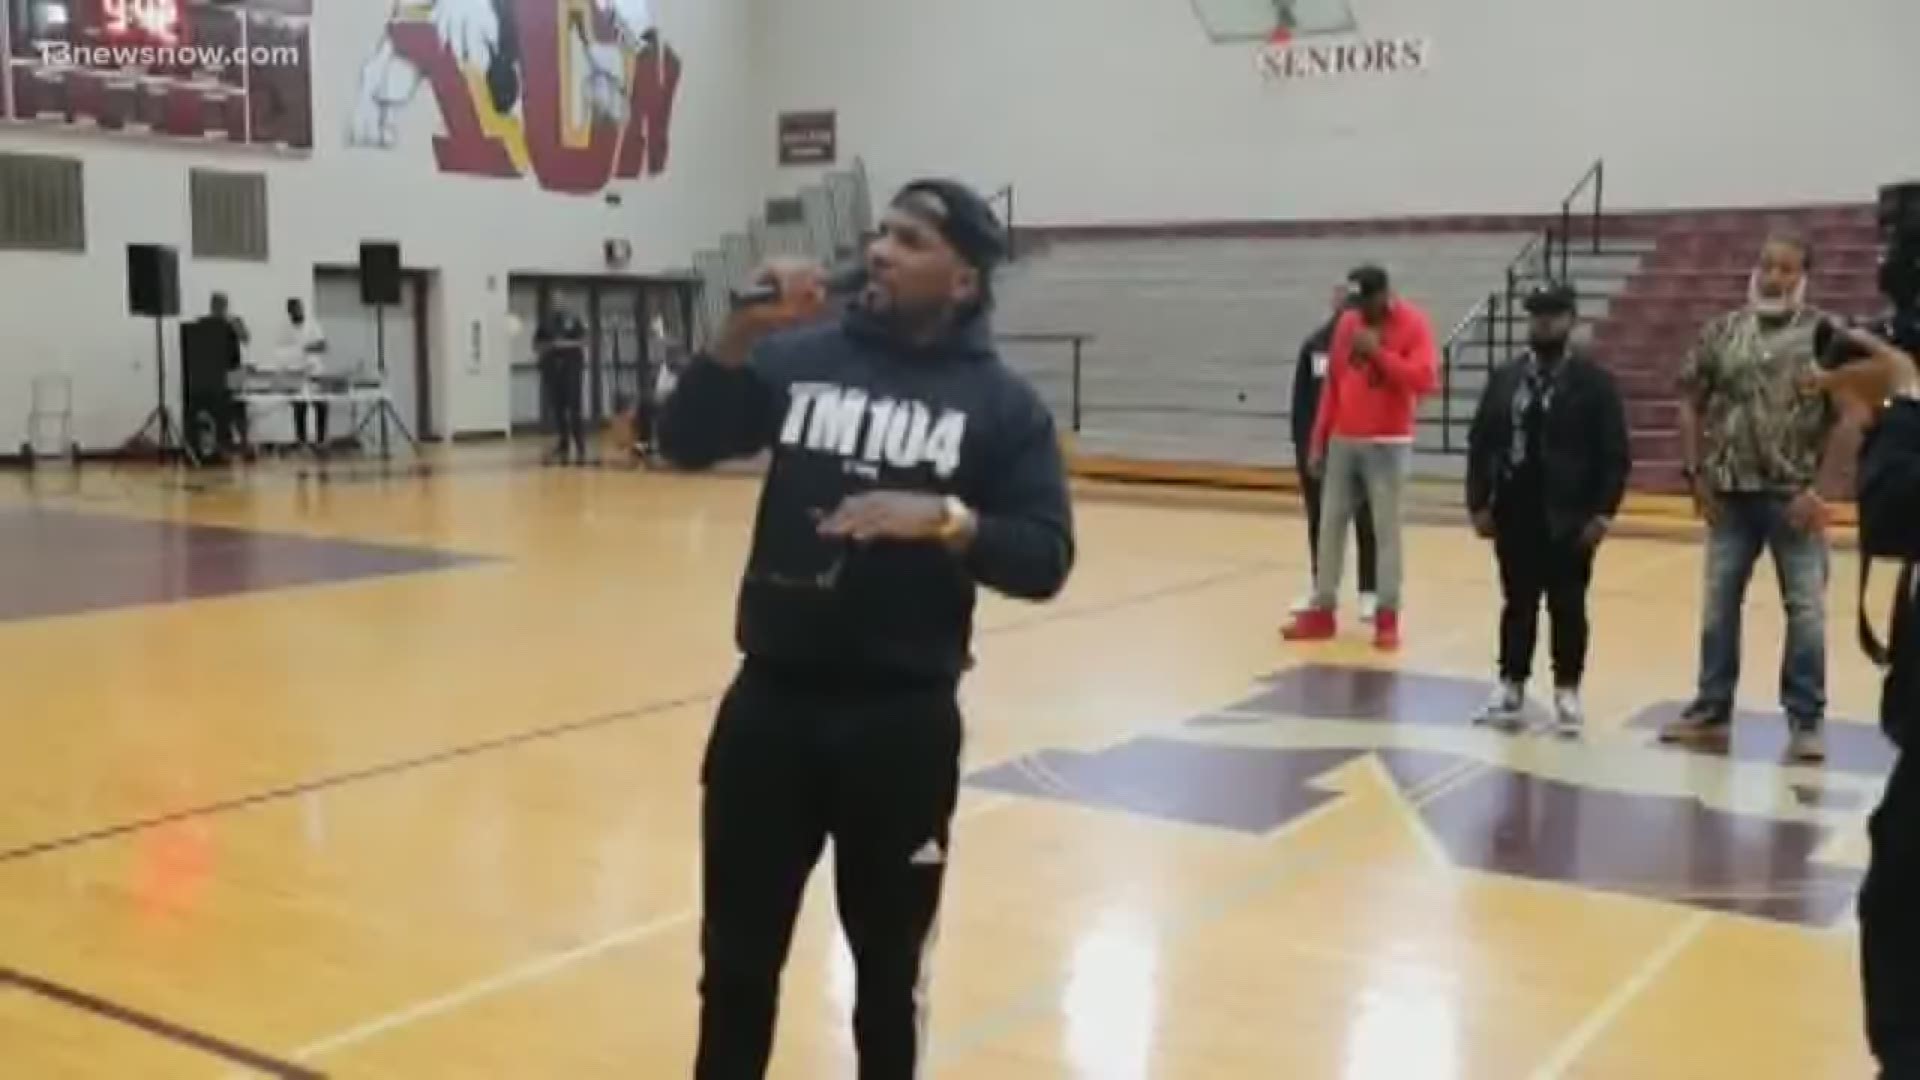 Rapper Jeezy spoke to students at I.C. Norcom High School on National Gun Violence Day.